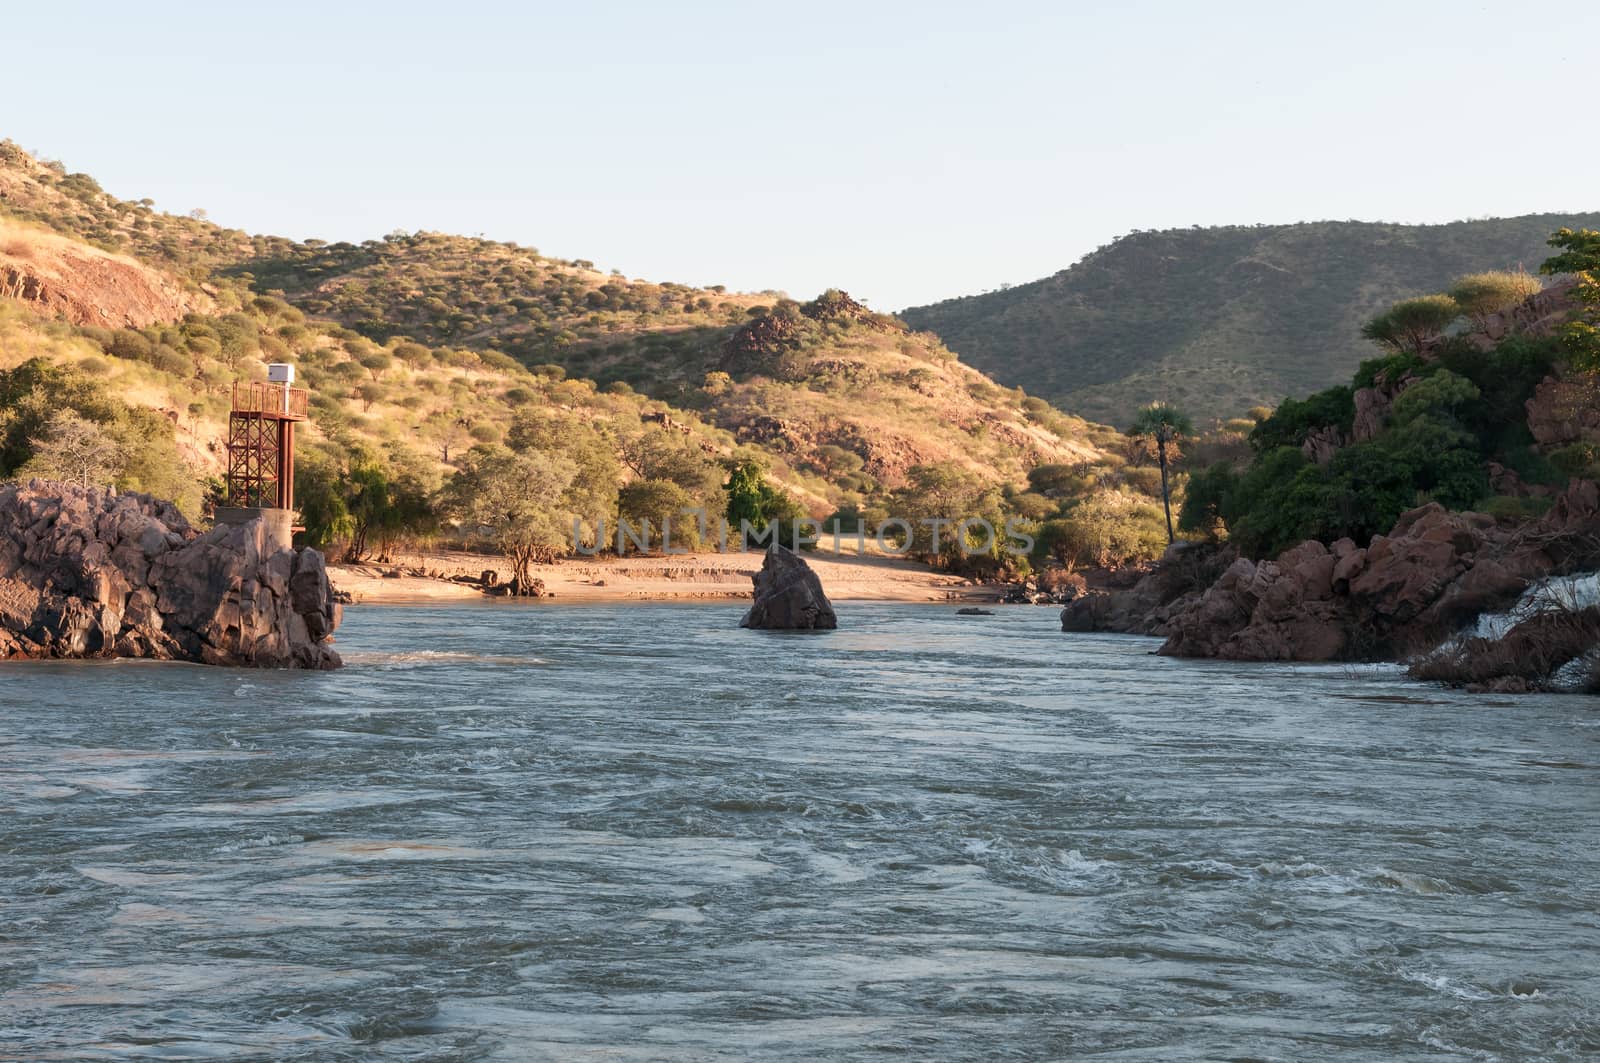 The Kunene River below the Epupa waterfalls. A flood level monitor tower is visible